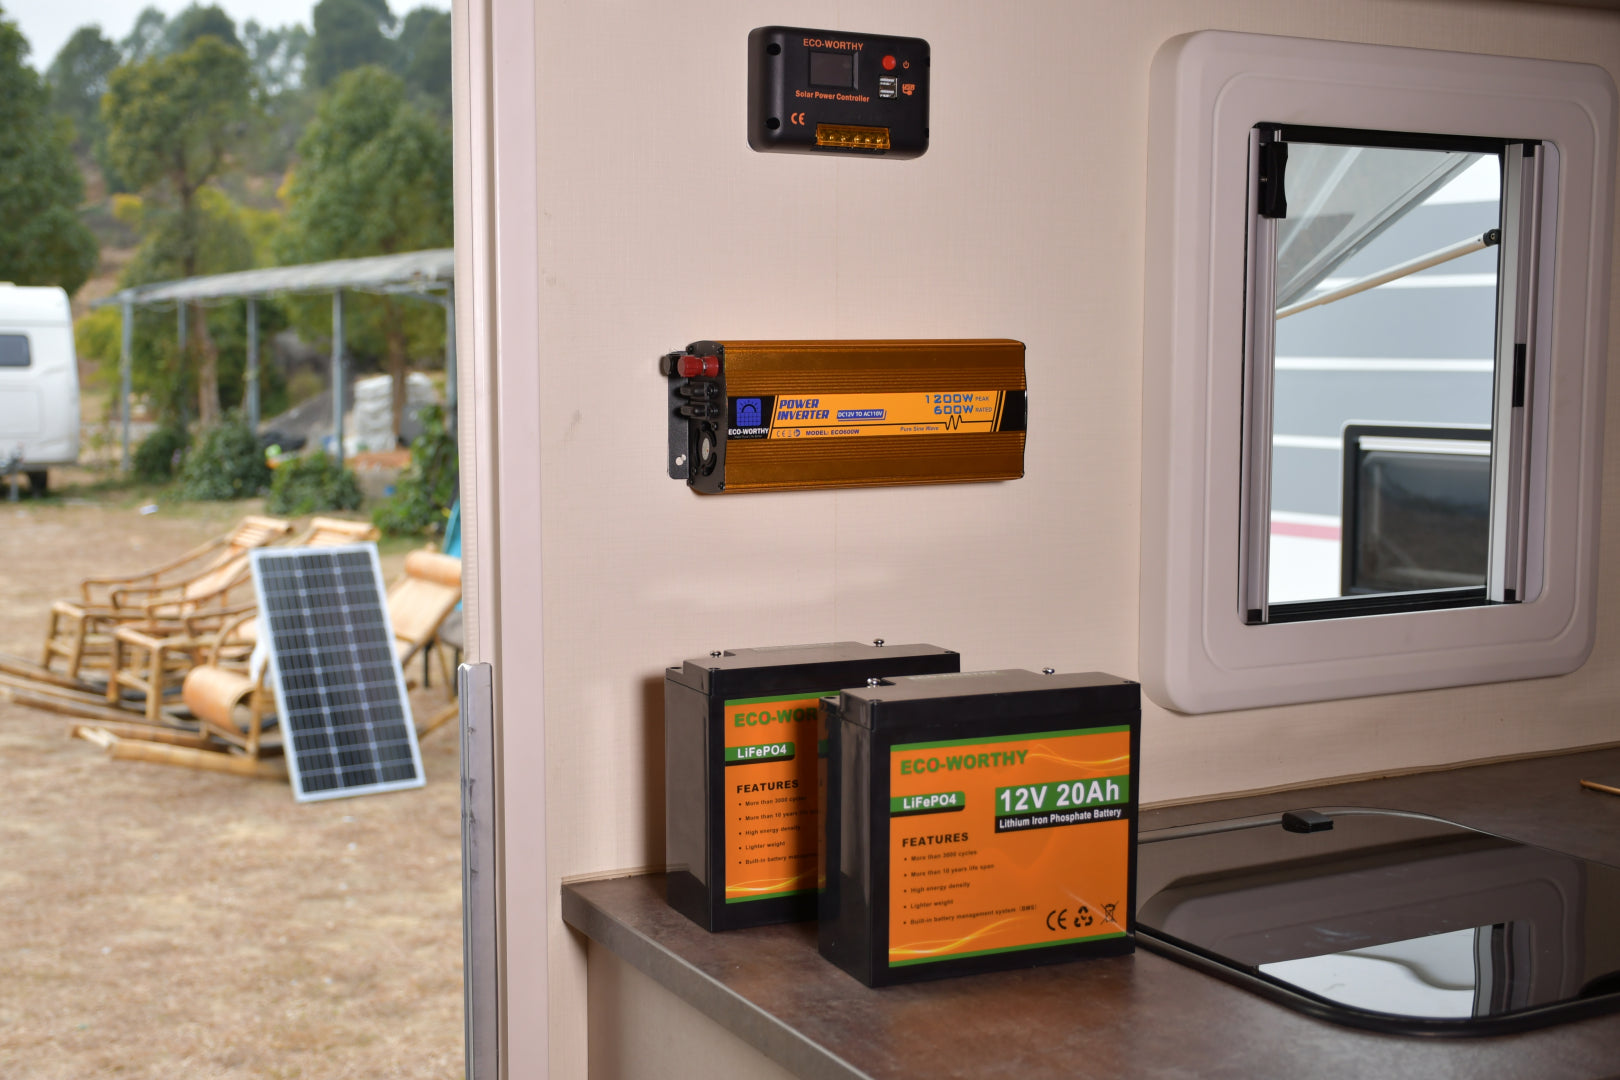 12v, 24v or 48v RV Electrical System-Which is the best choice – ECO-WORTHY